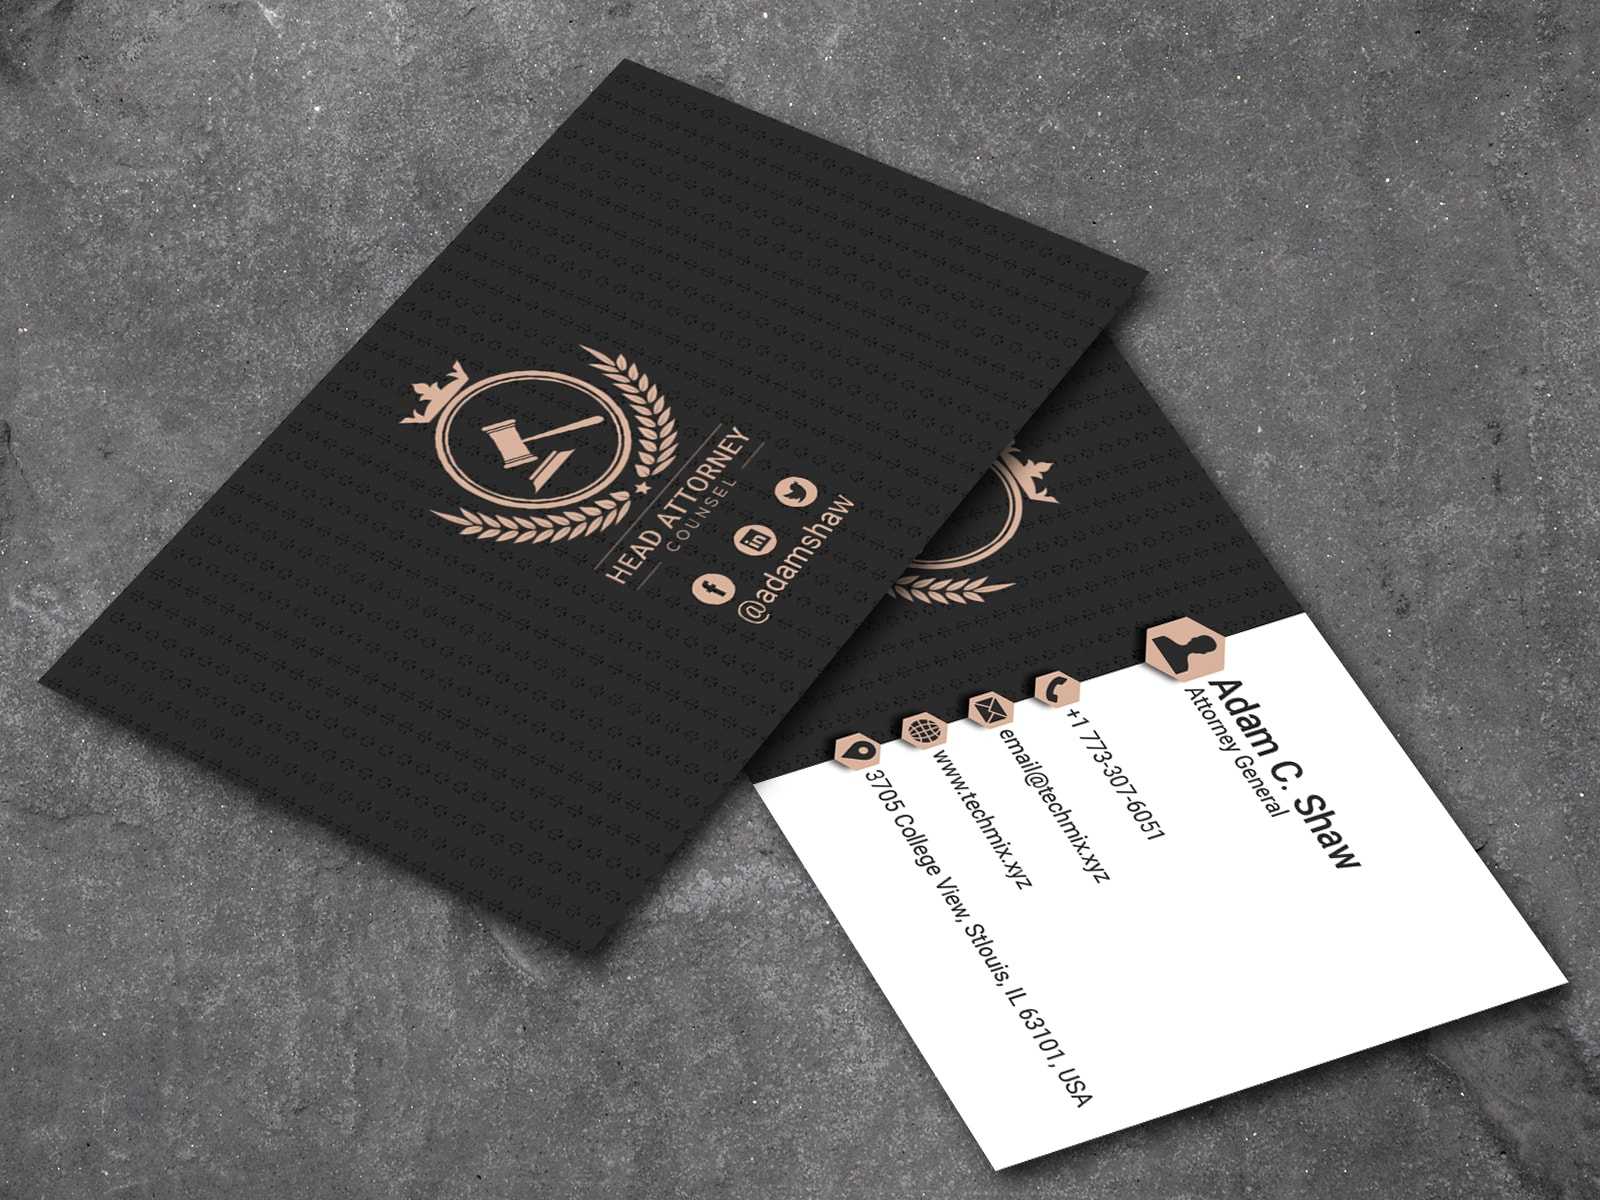 Lawyer Business Cards 2020 | Techmix With Regard To Lawyer Business Cards Templates